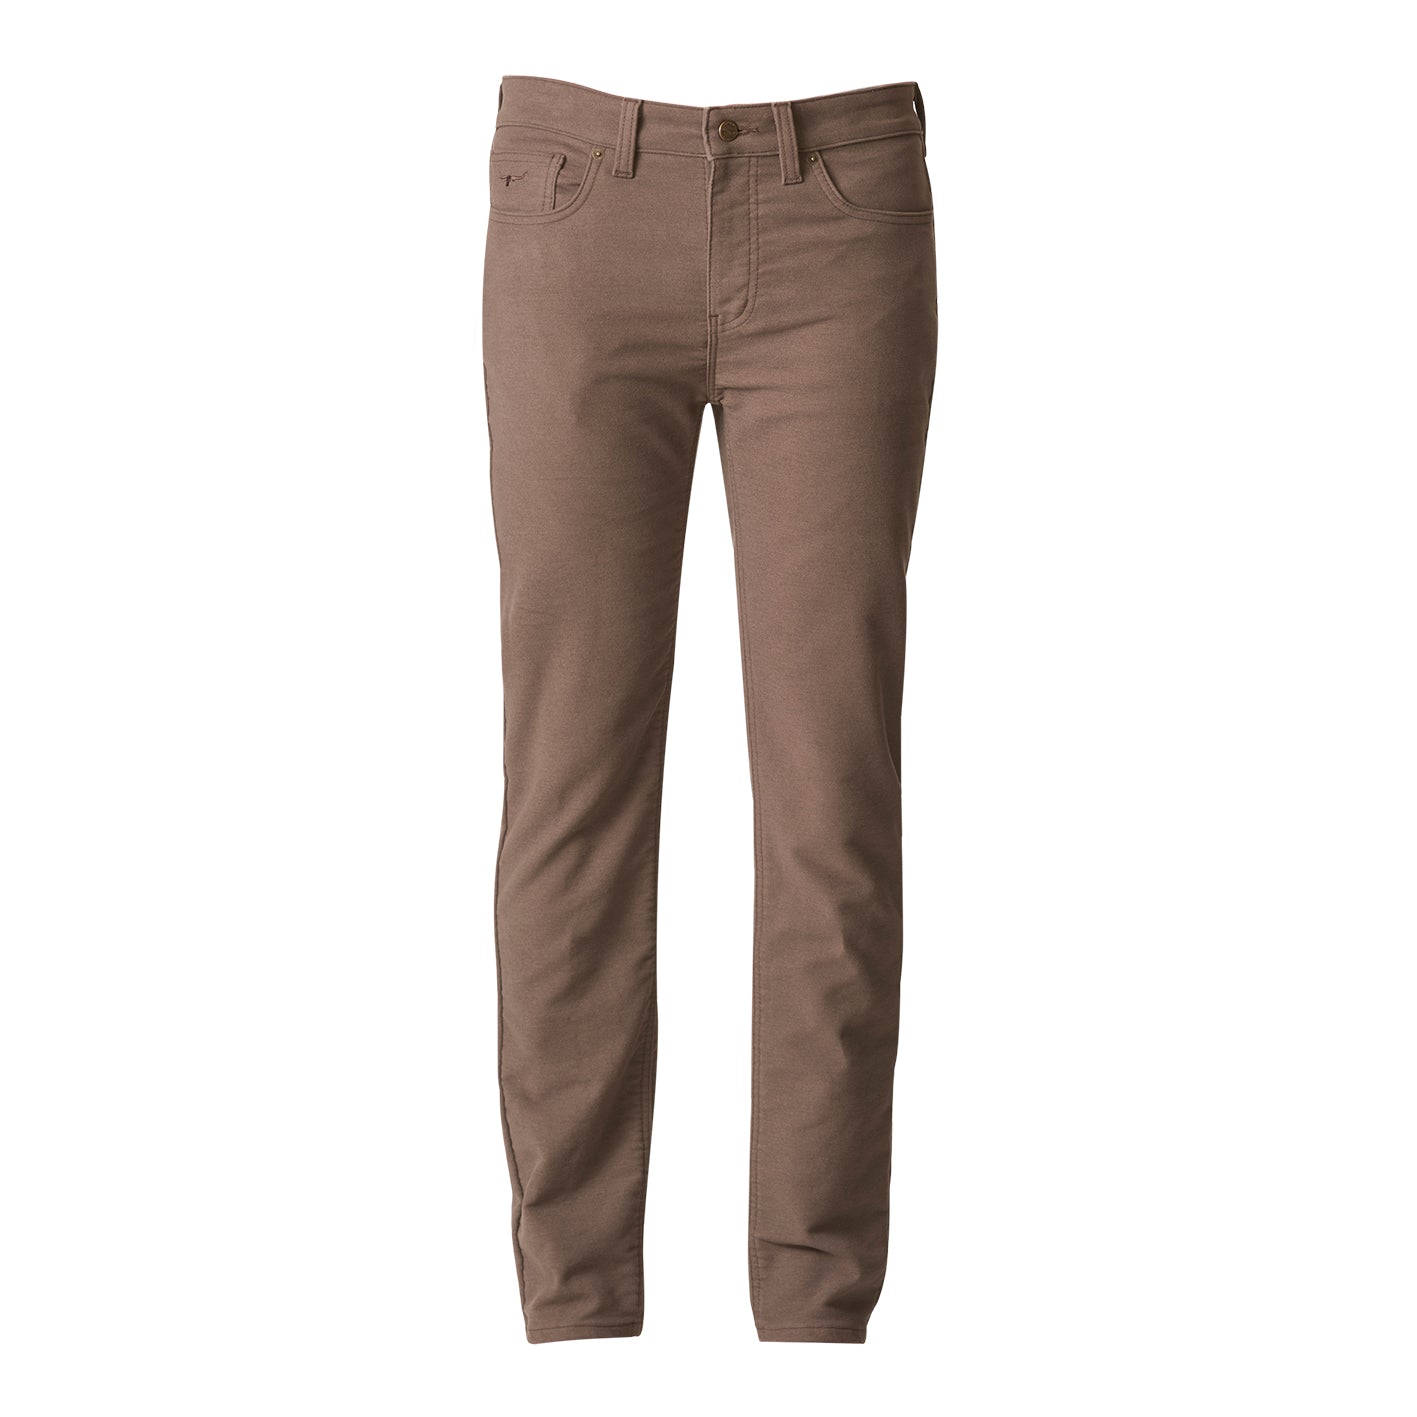 Ramco Stretch Moleskin Jeans - Taupe